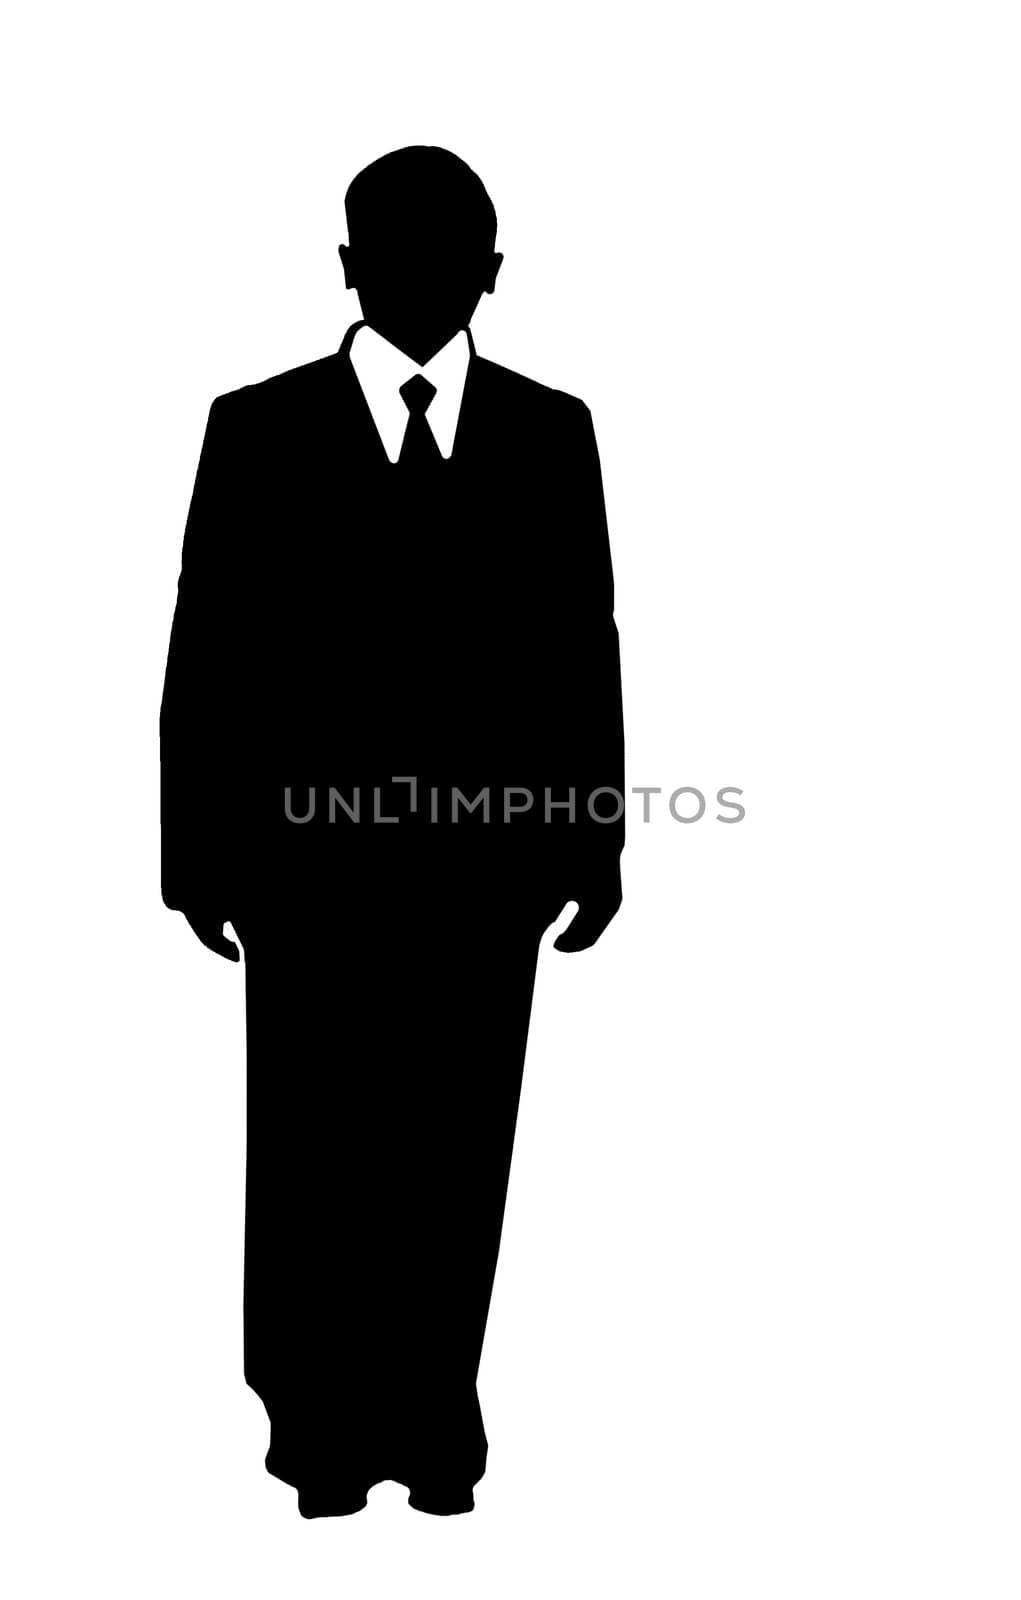 An silhuoette of man in black